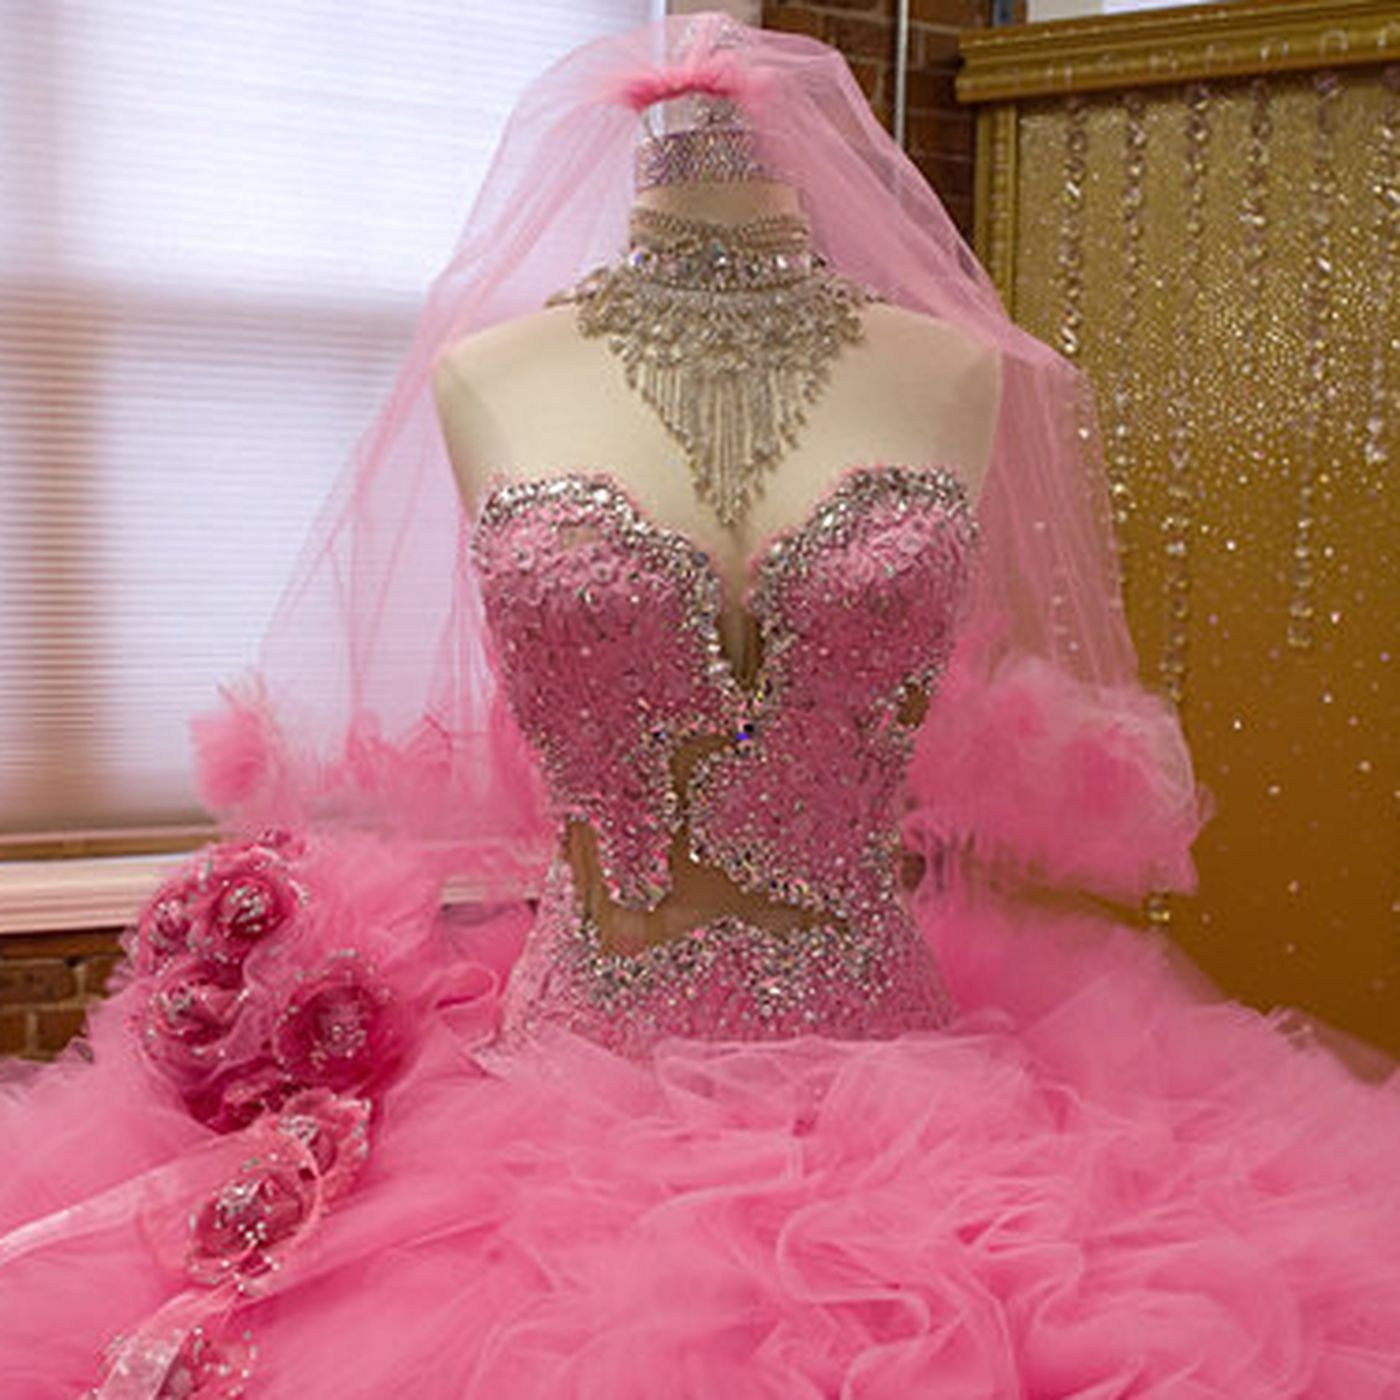 How Much Do Gypsy Wedding Dresses Cost
 51 New How Much Do sondra Celli Wedding Dresses Cost Pics